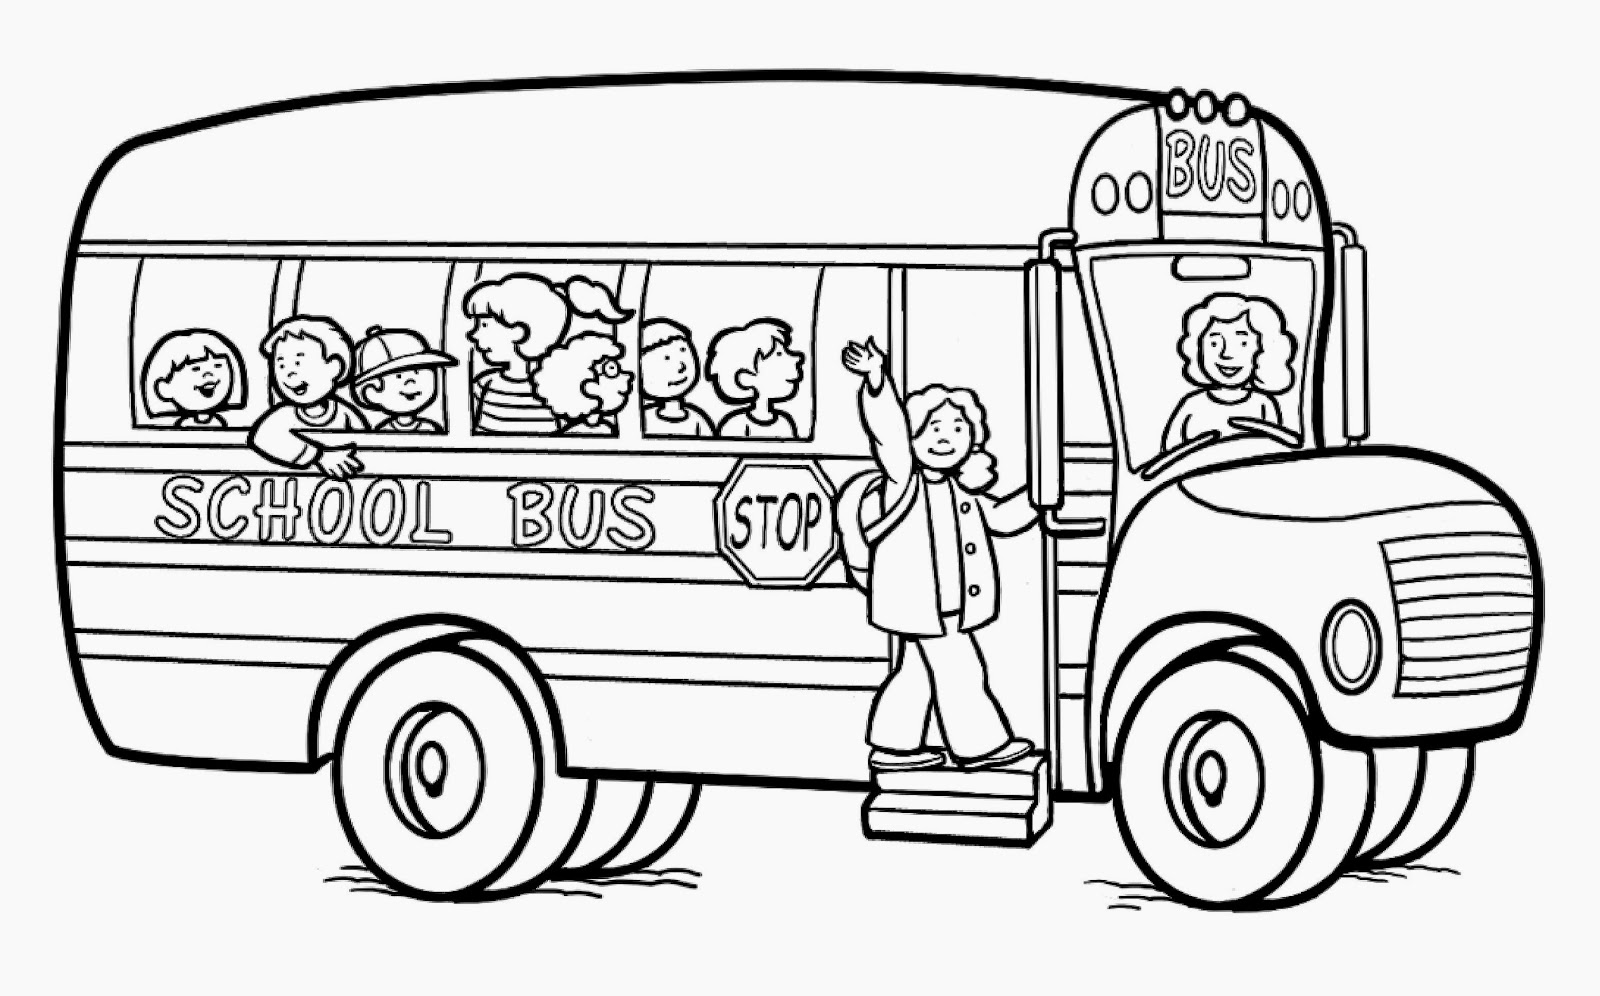 back-to-school-coloring-pages-for-second-grade-at-getcolorings